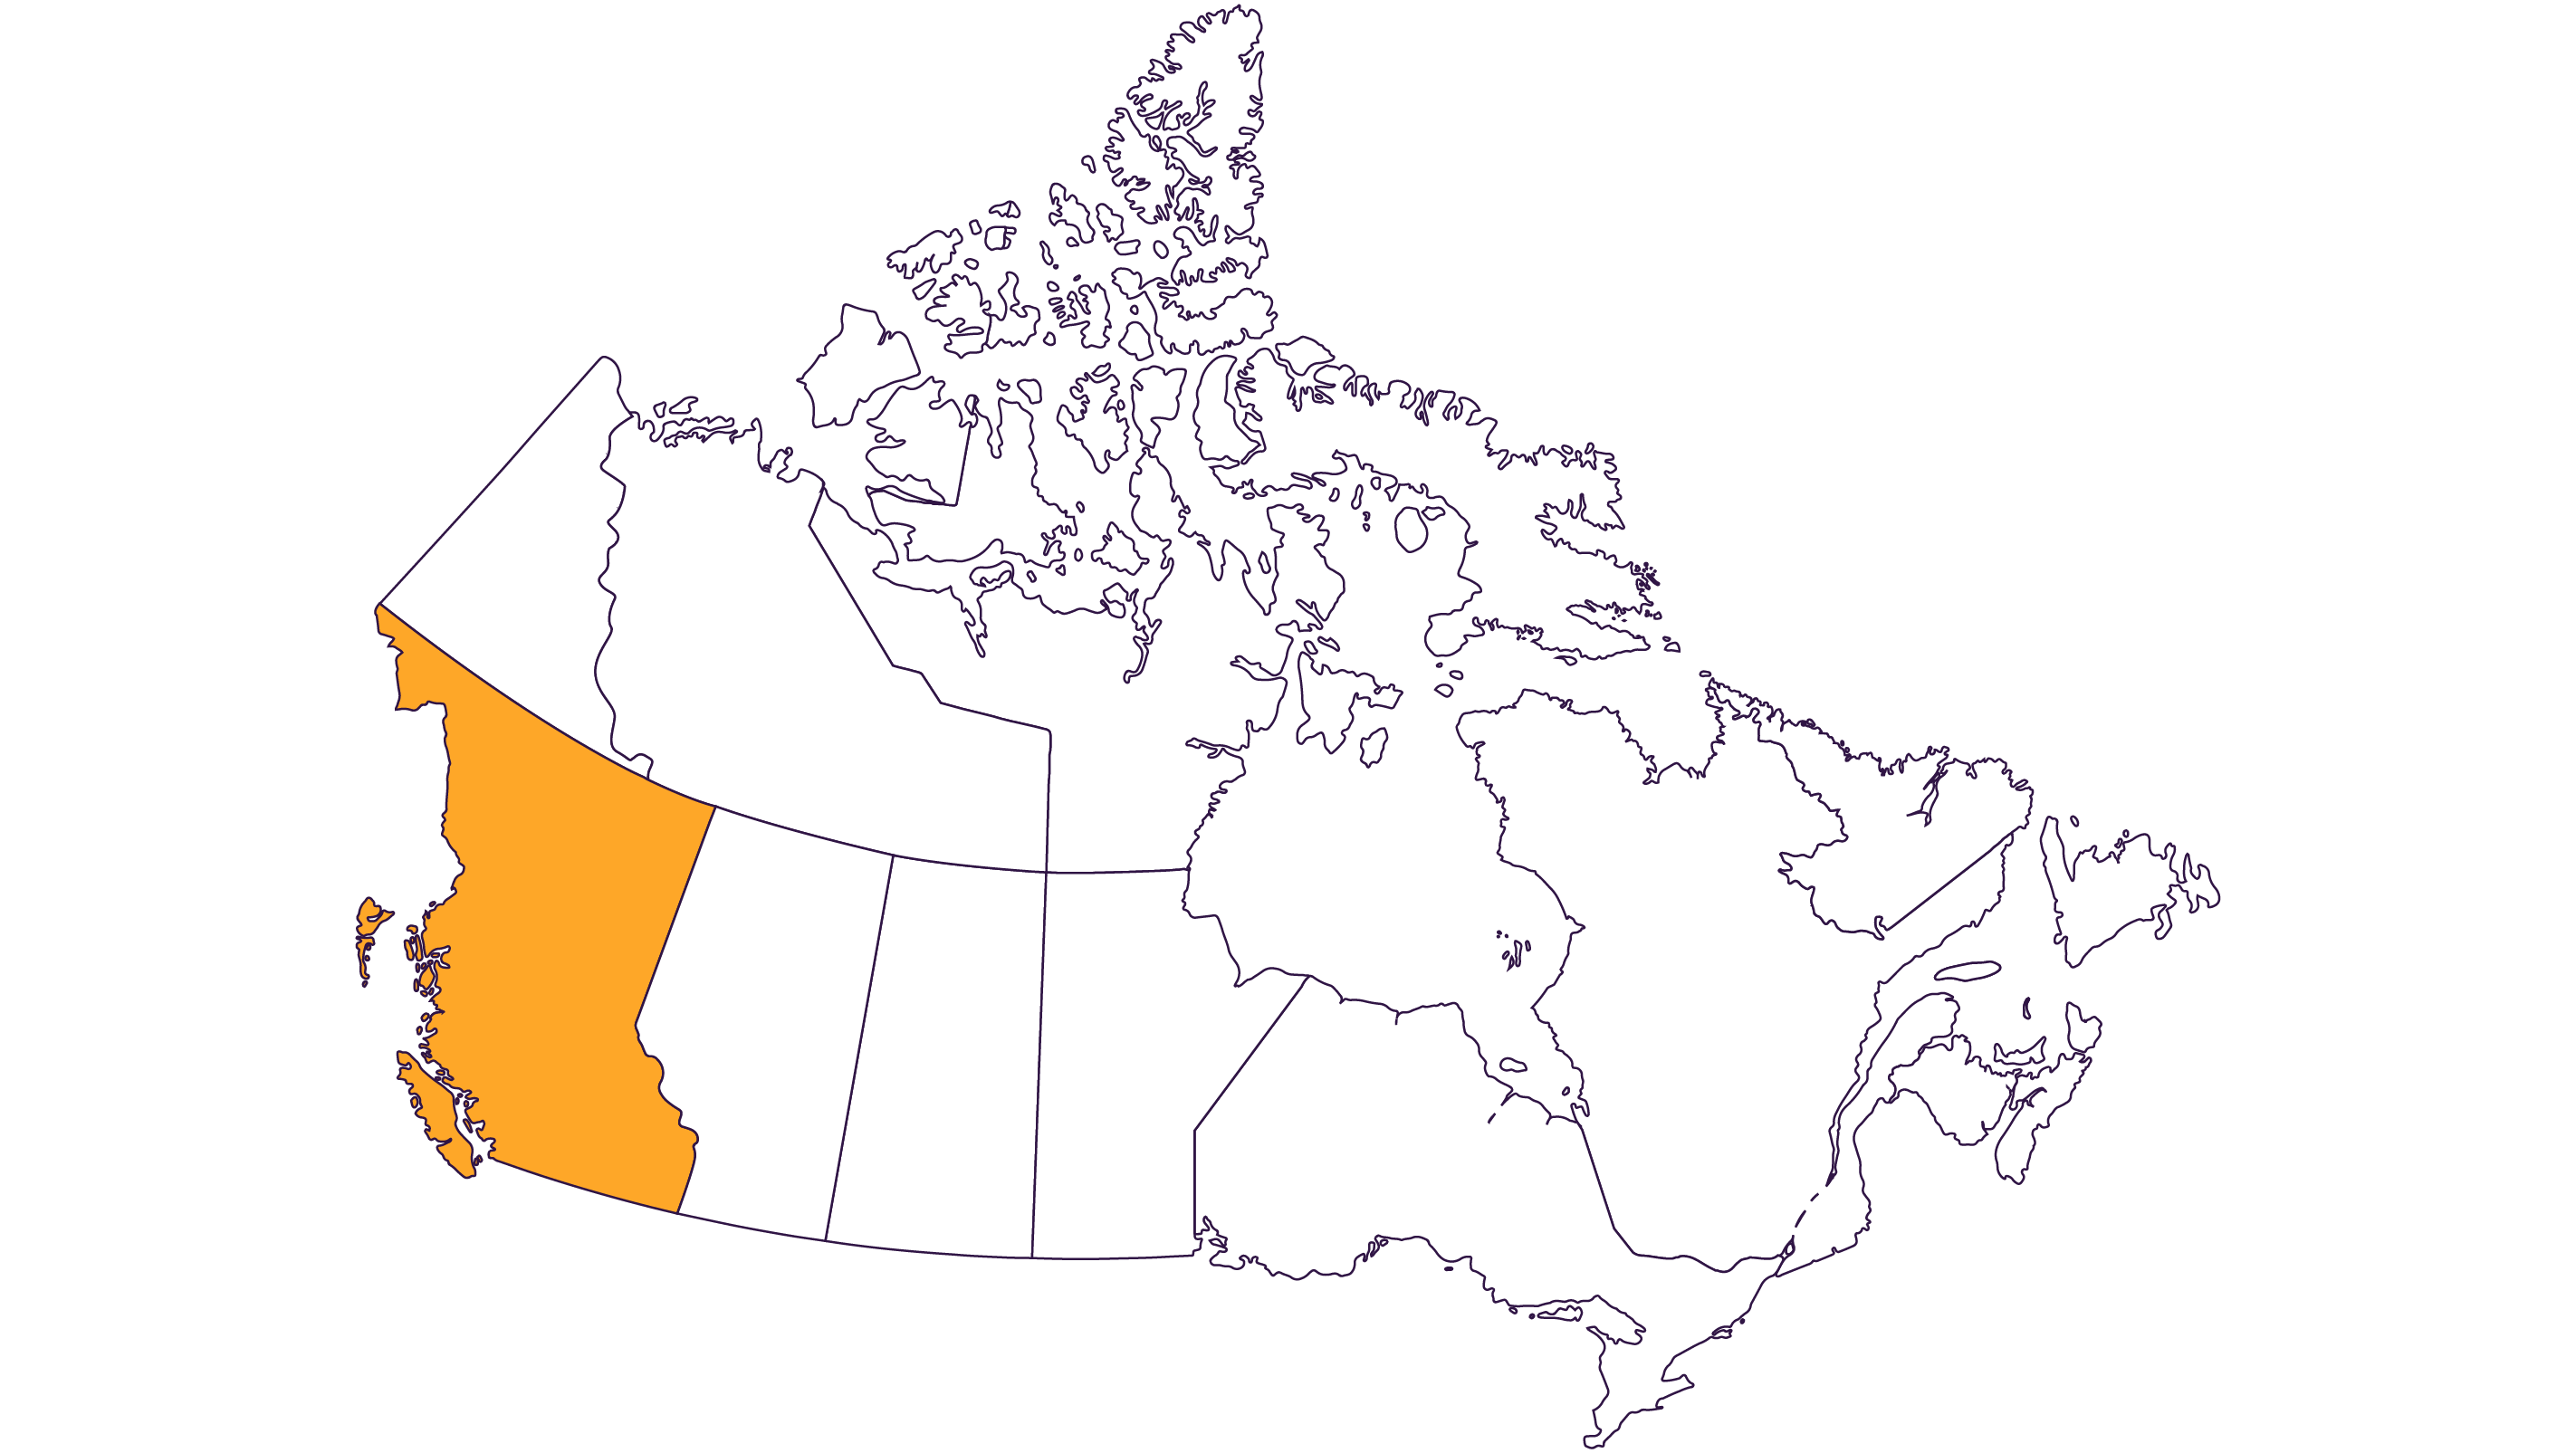 A map of Canada with British Columbia highlighted in yellow.